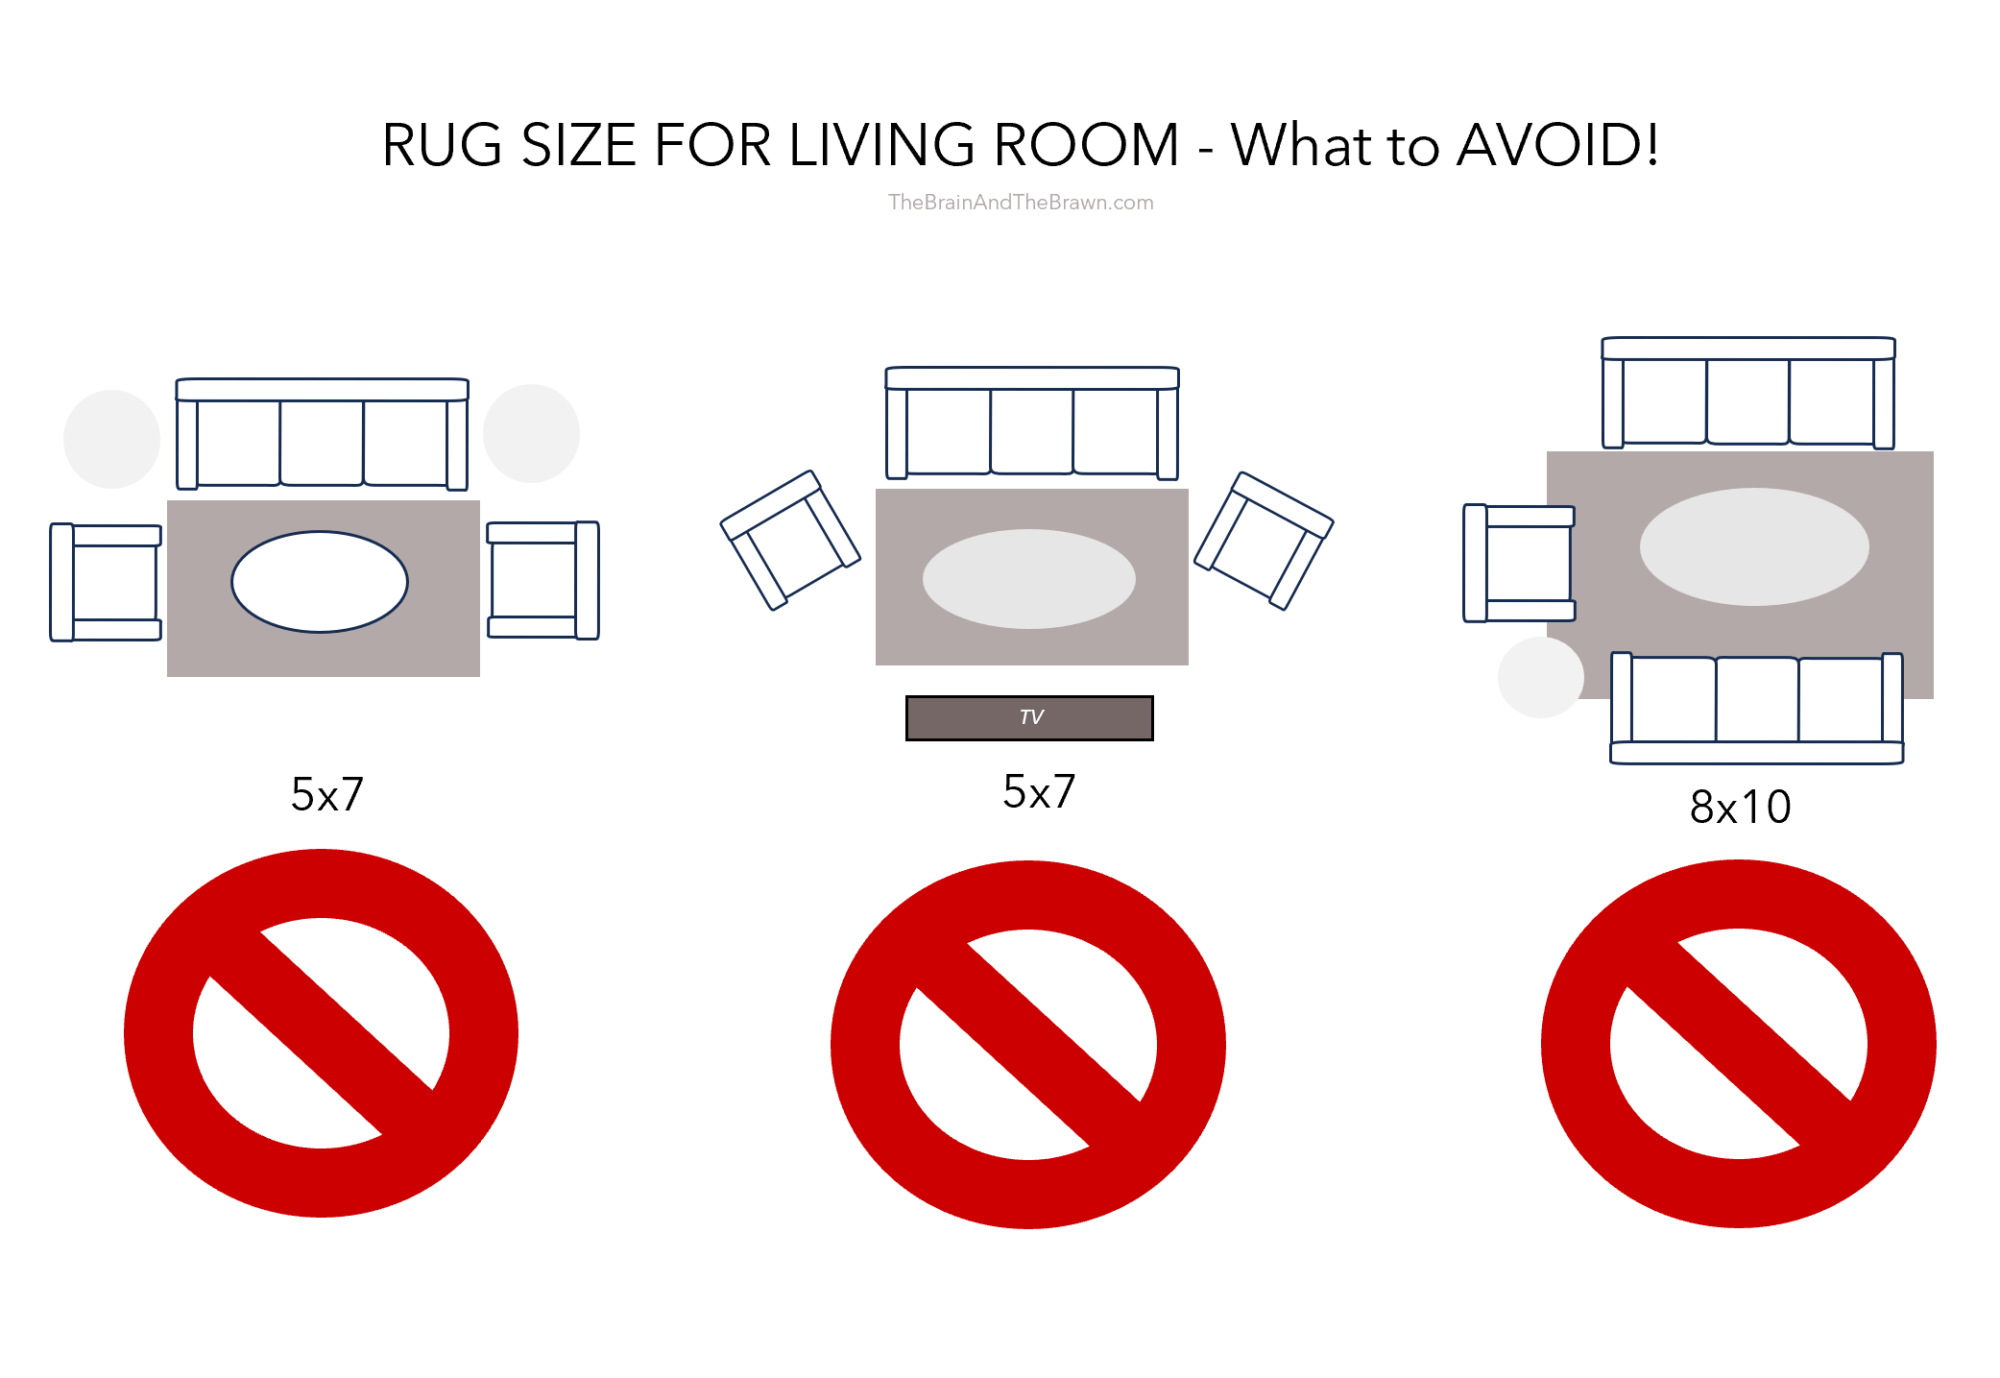 An example diagram of what rug sizes and furniture places to avoid in a living room. 